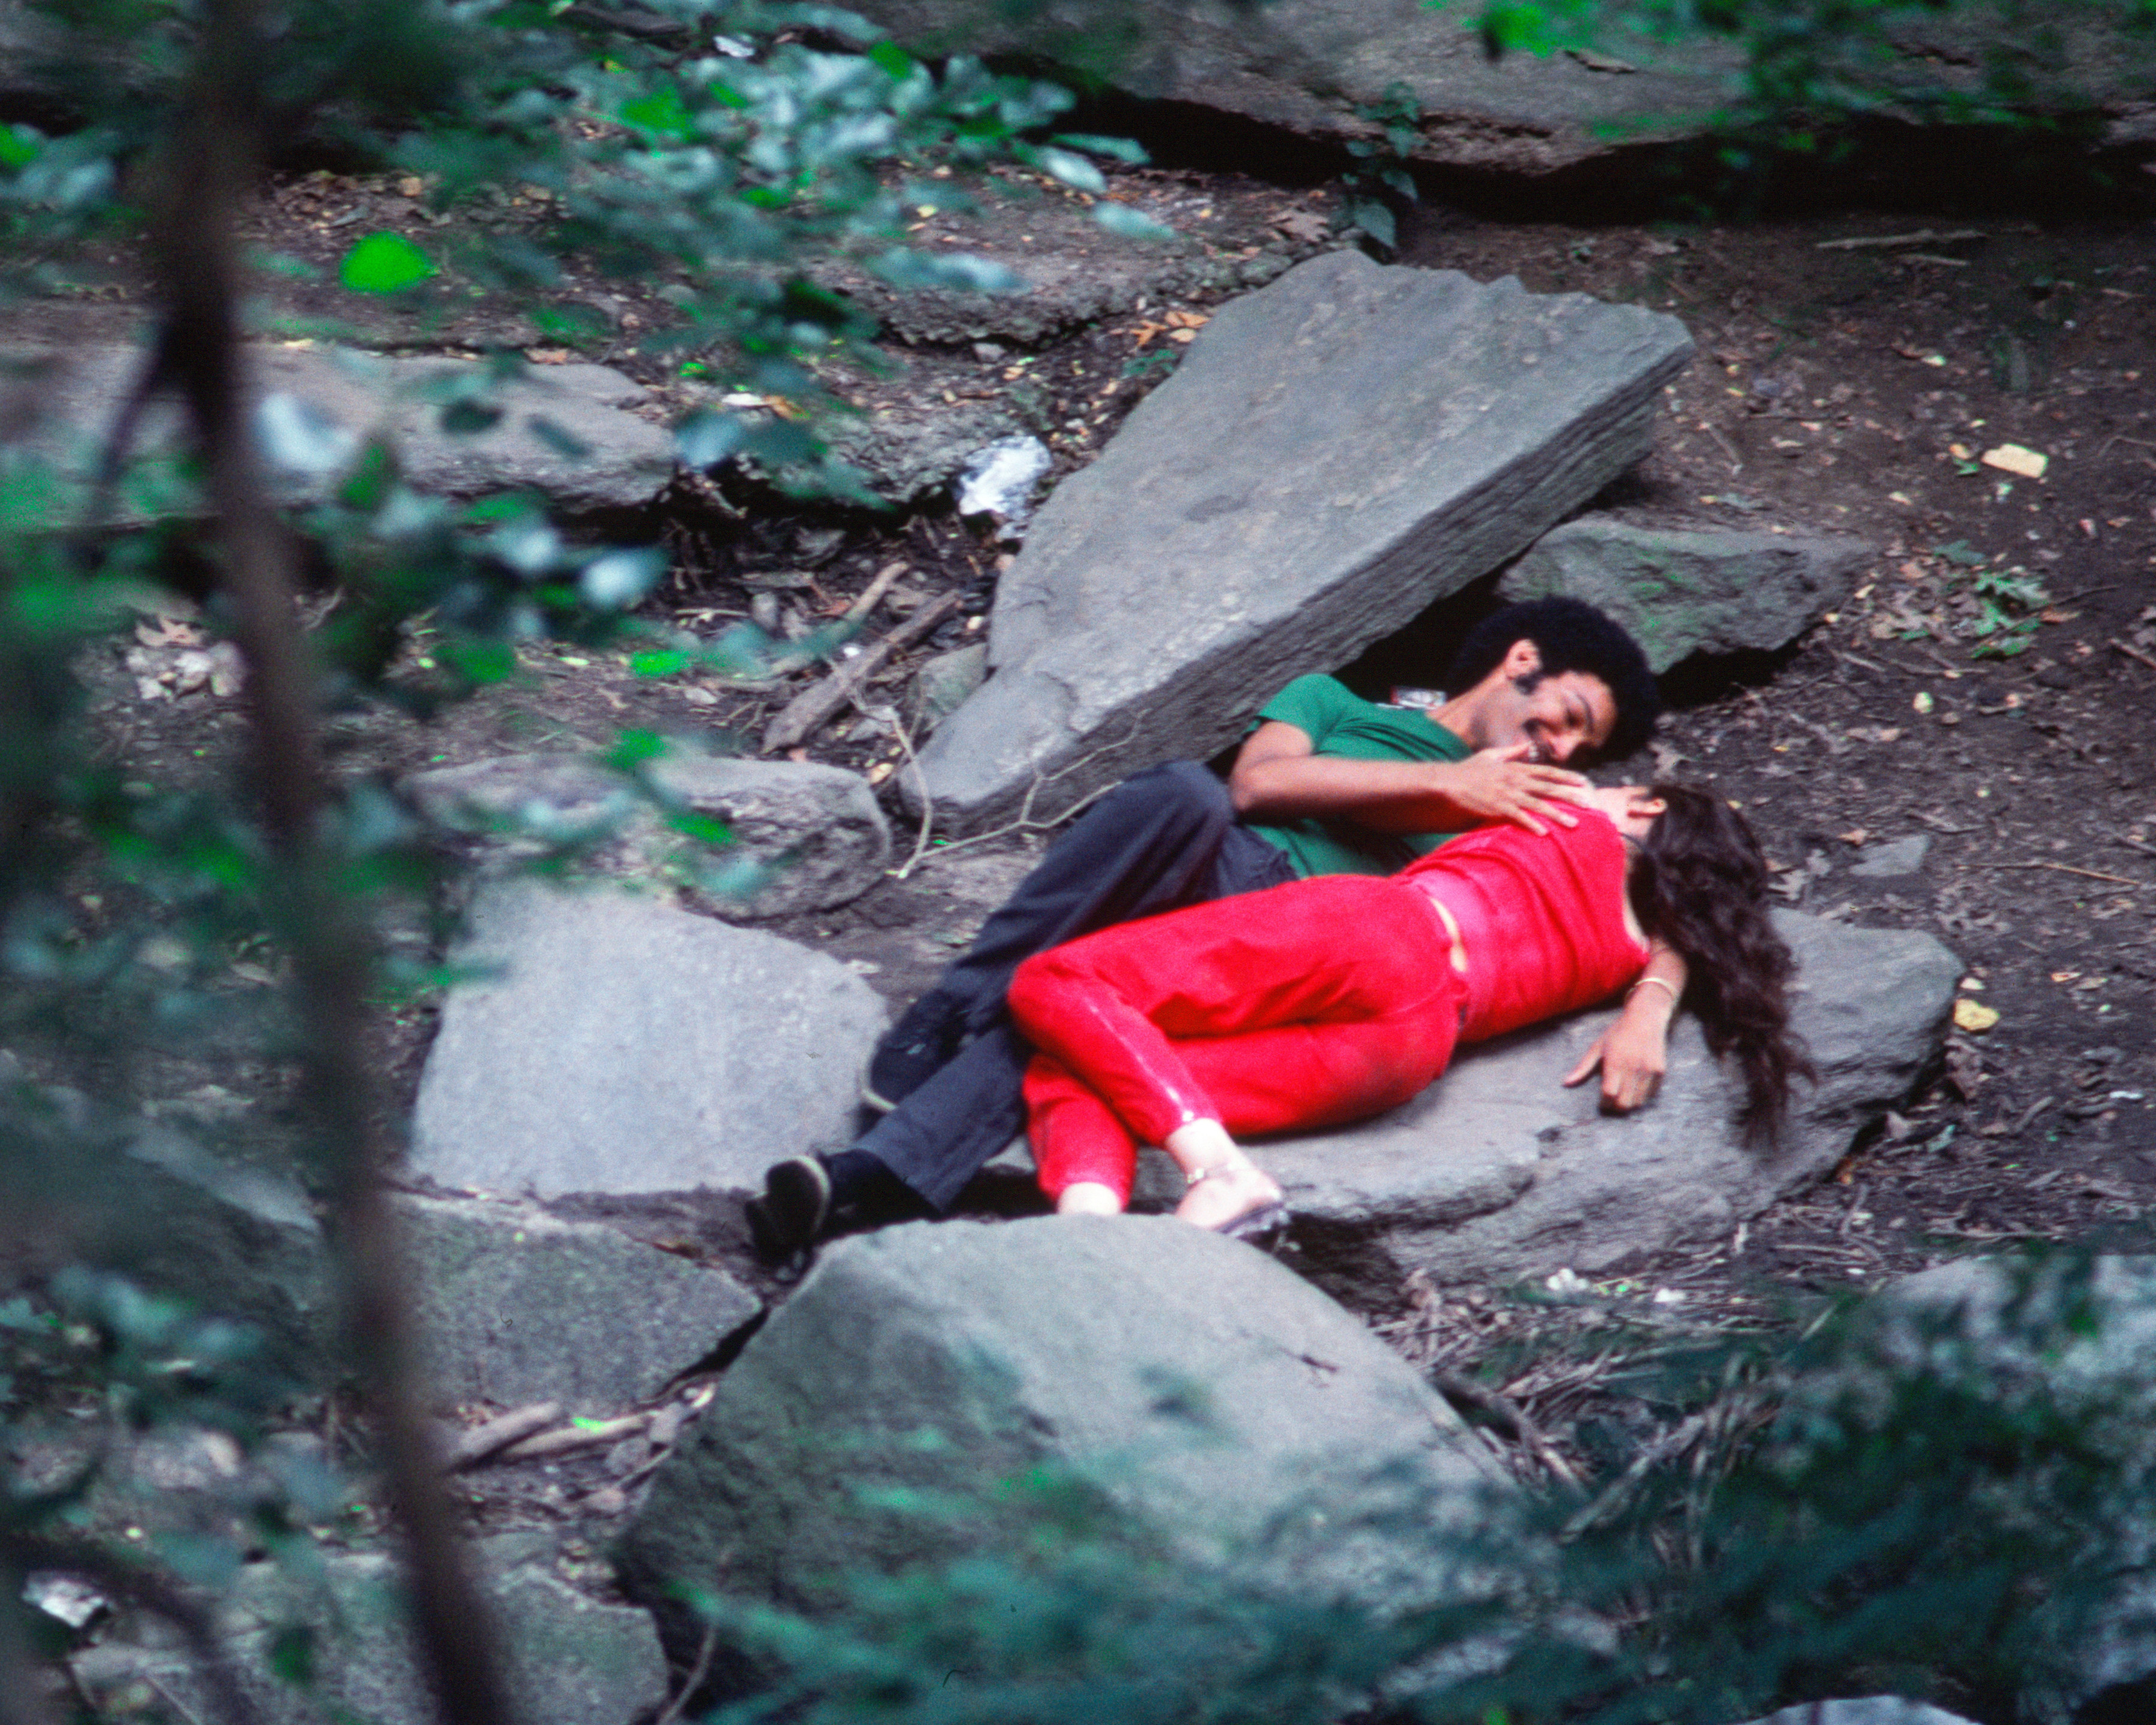 Rivers, First Draft: The Young Man in Green makes love to the Teenager in Magenta, 1982/2015, Digital C-print from Kodachrome 35mm slides in 48 parts, 16h x 20w in (40.64h x 50.80w cm)